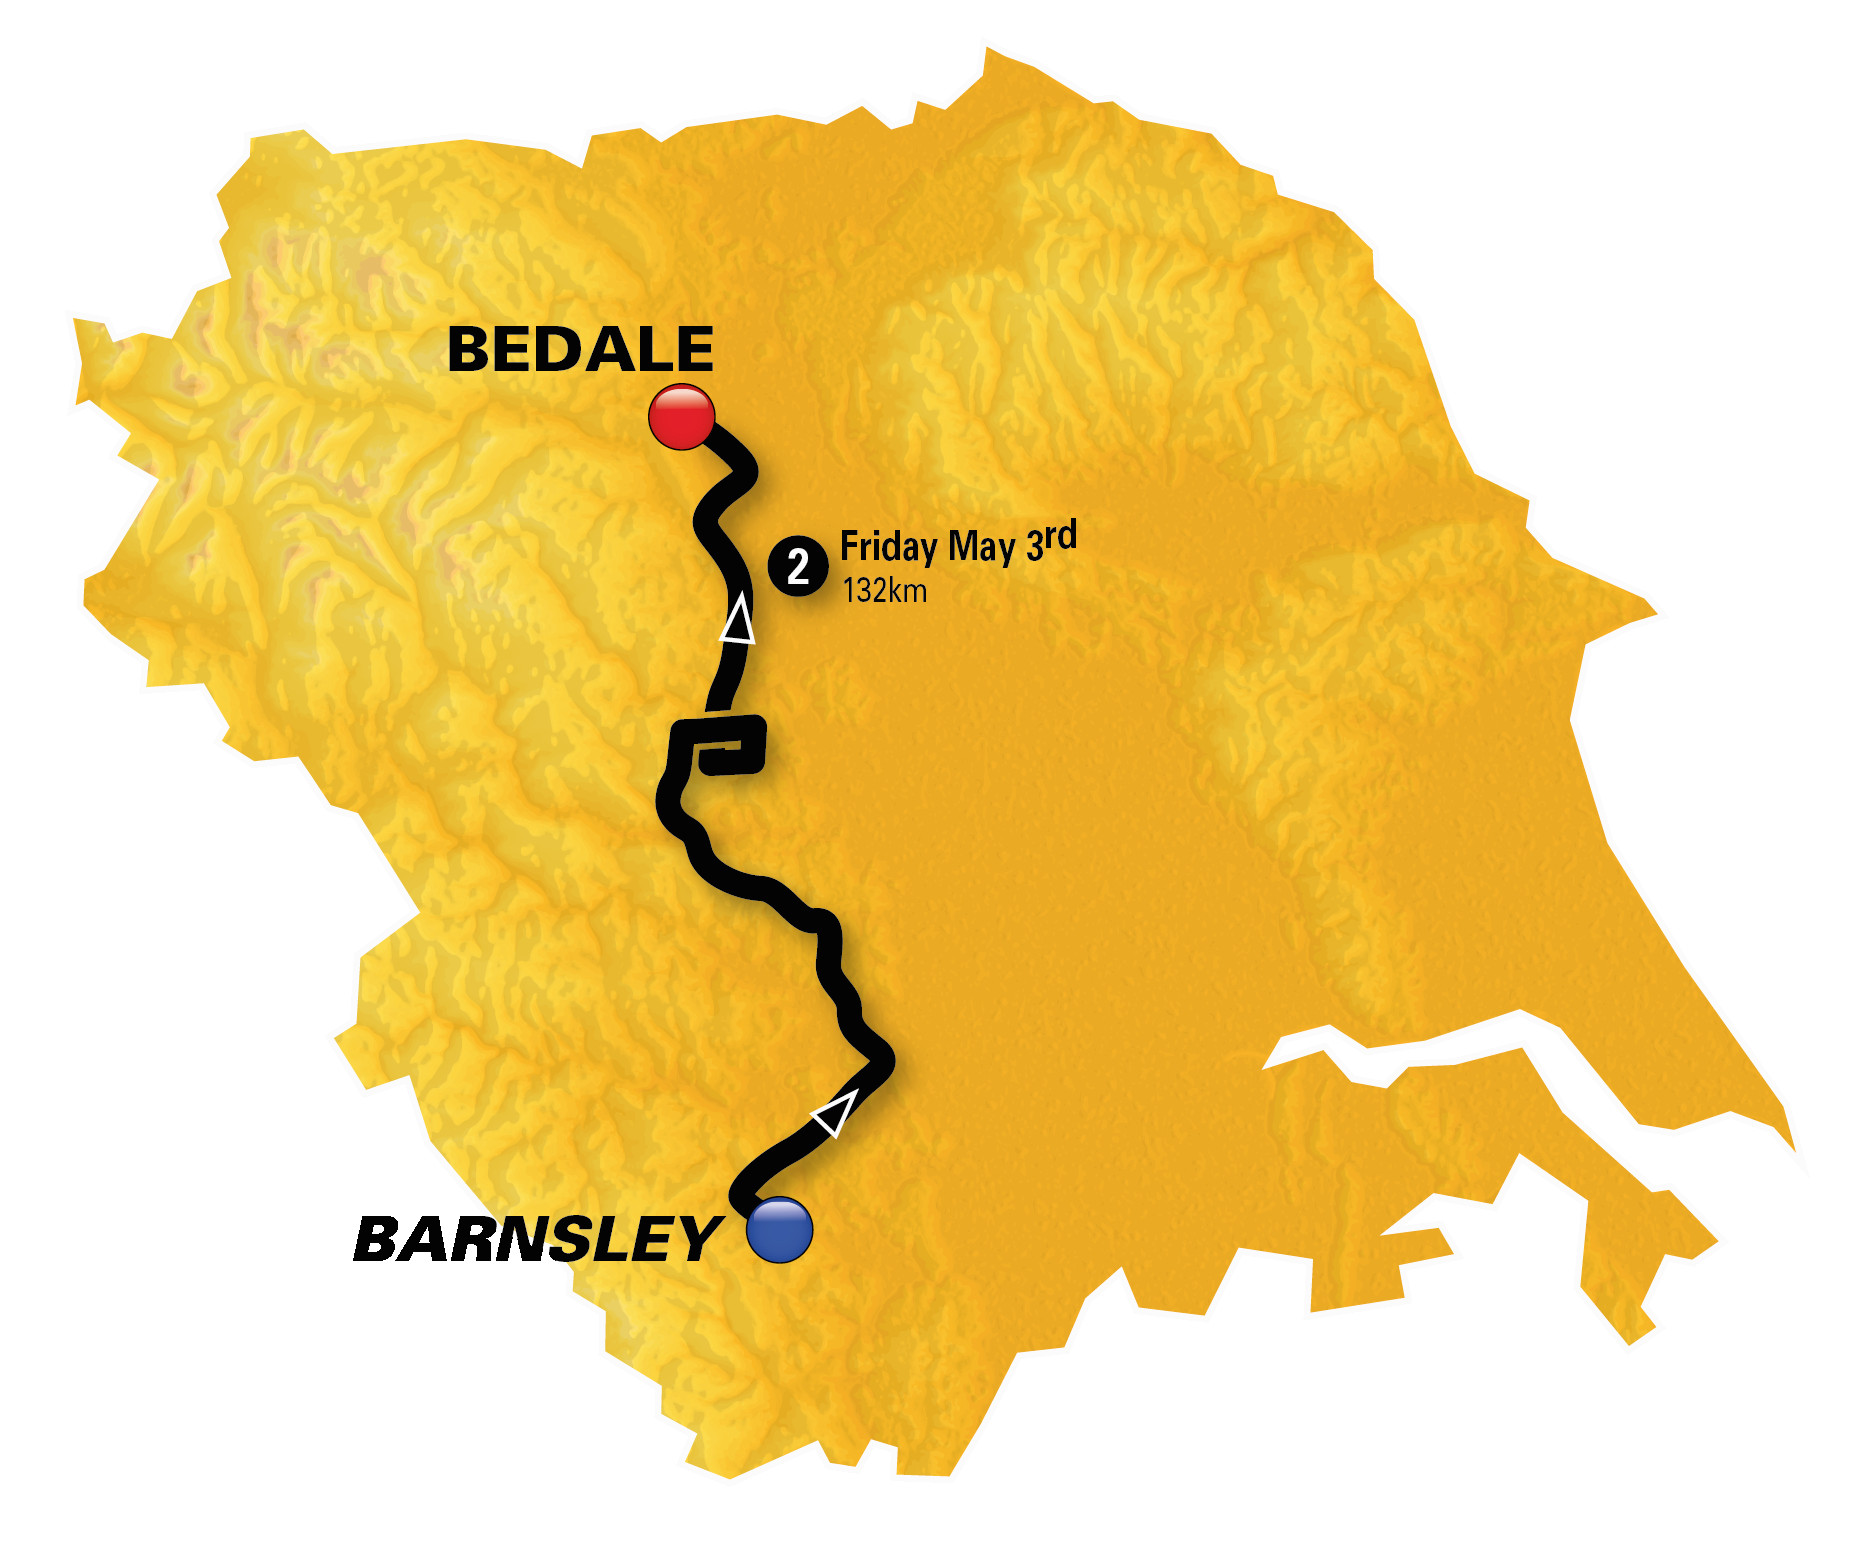 stage 2 barnsley to bedale 132km tour de yorkshire 2 5 may 2019